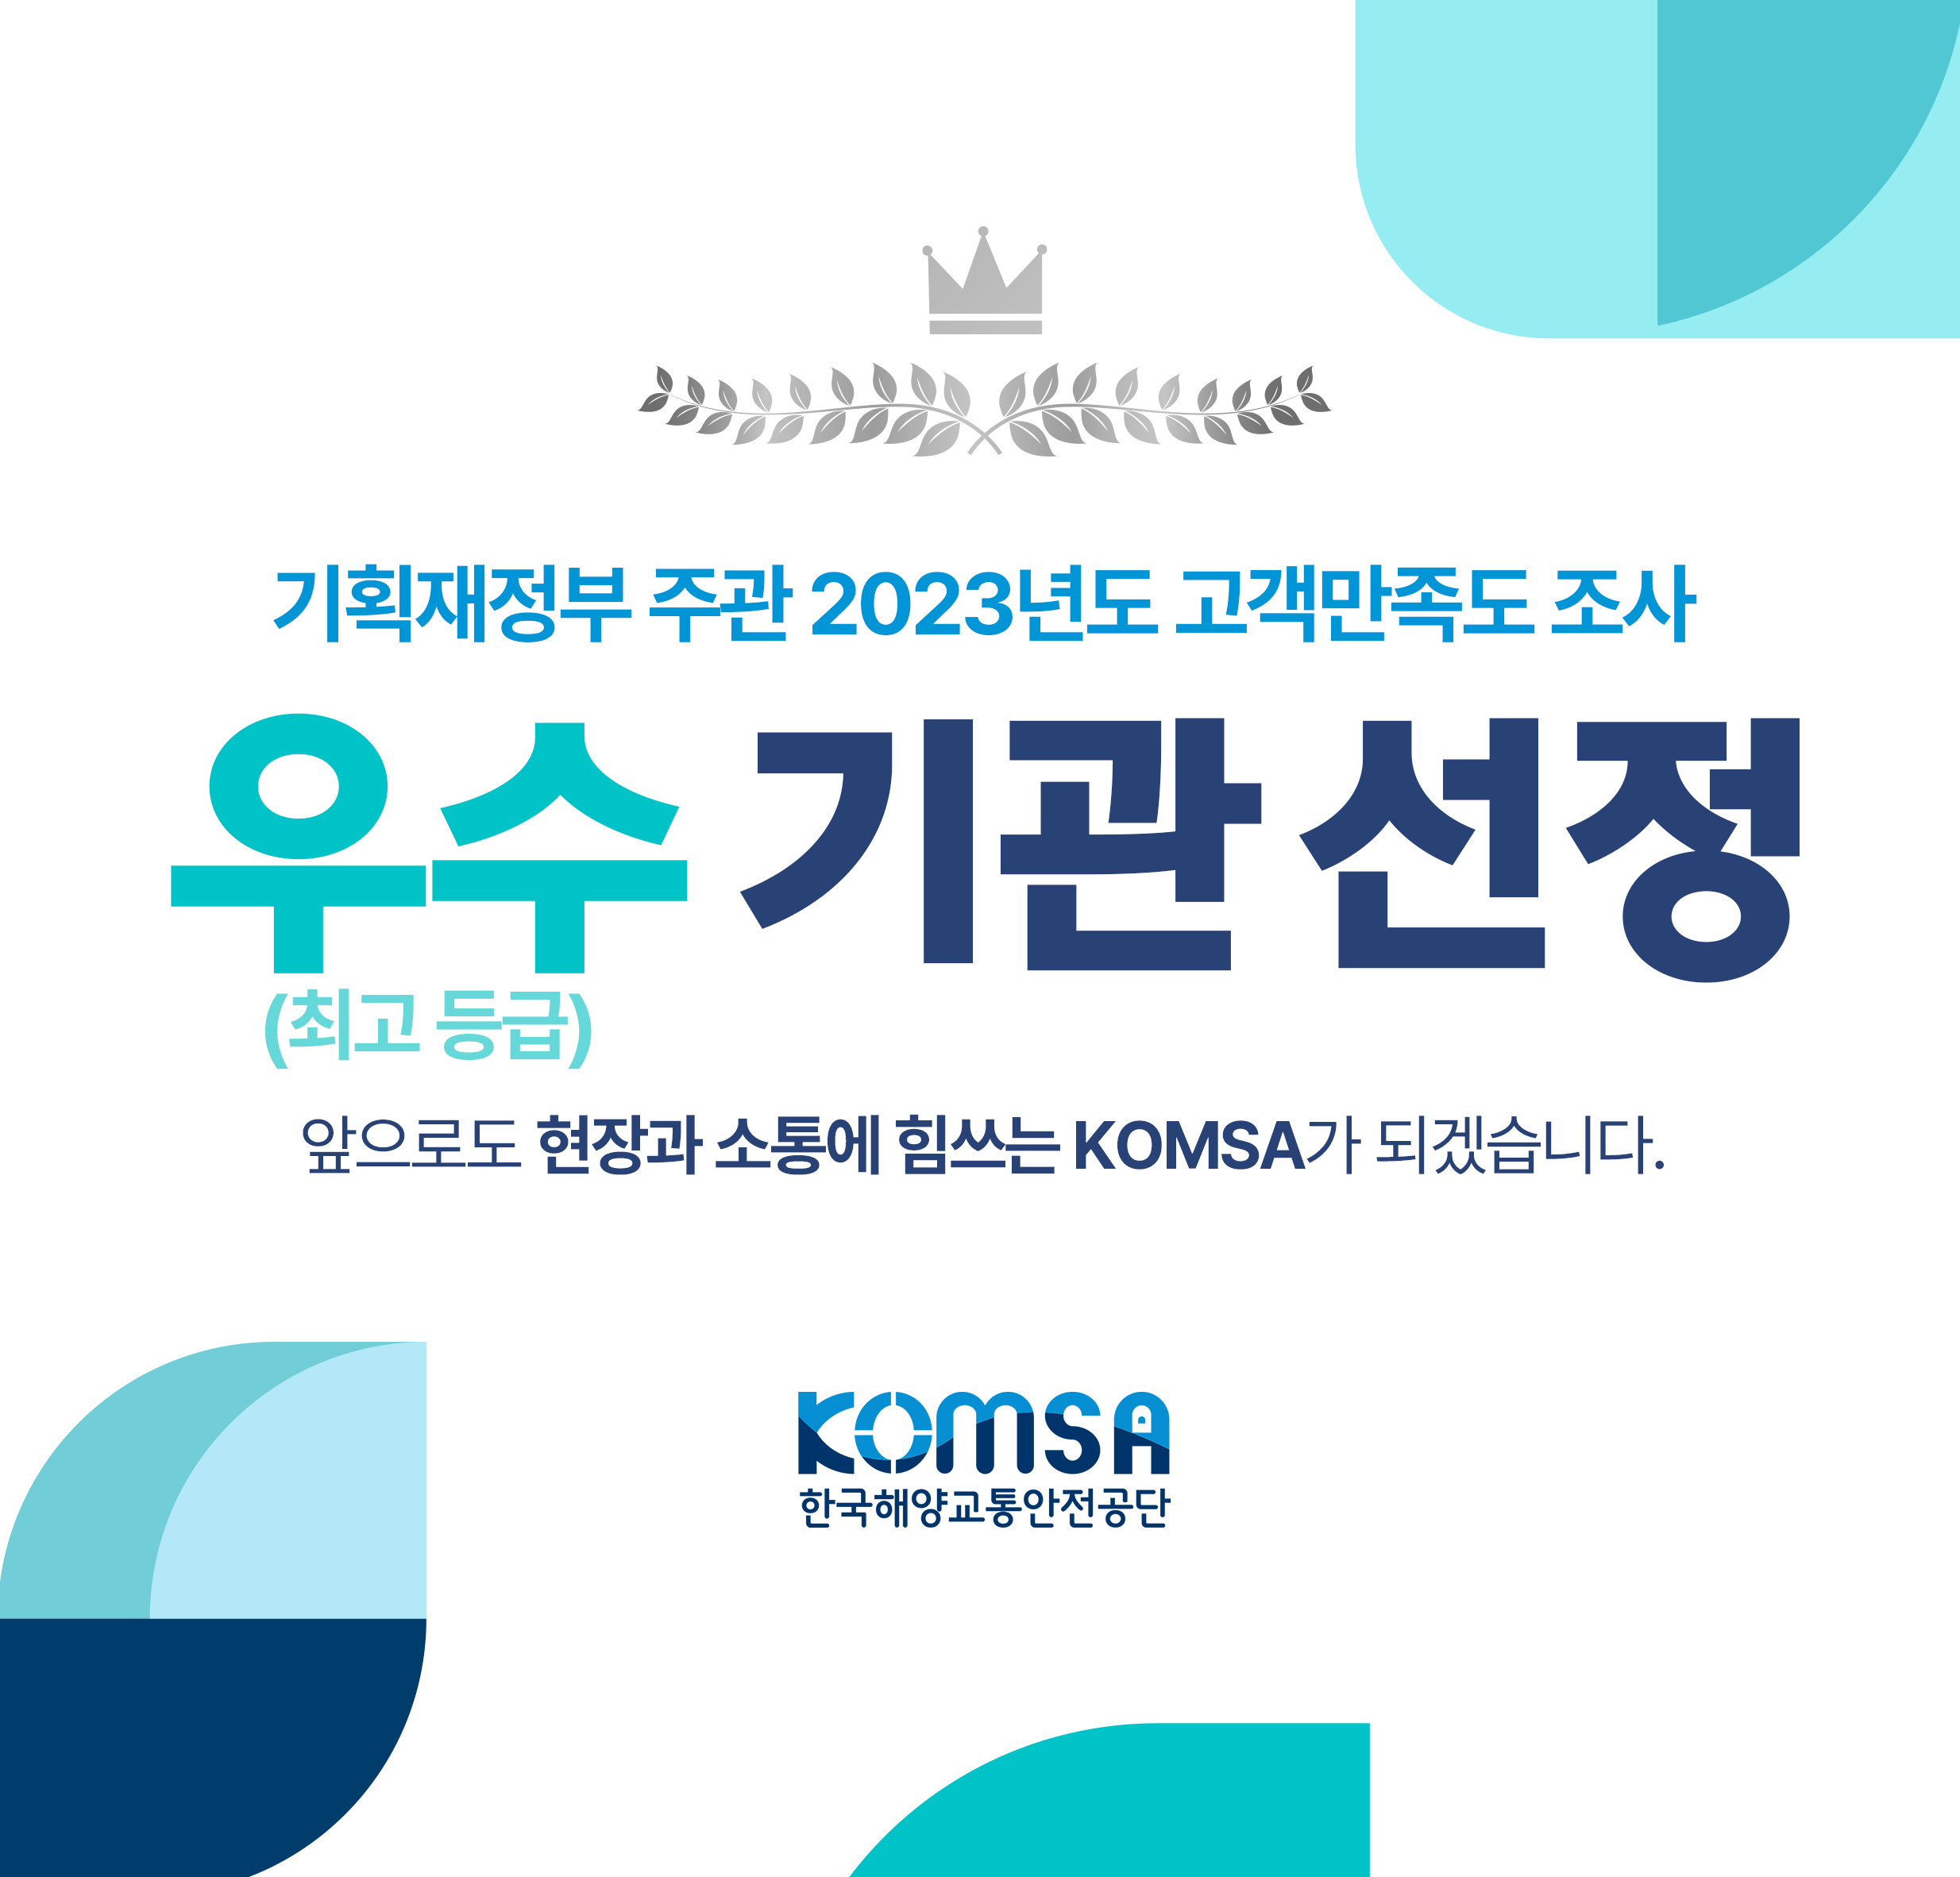 https://www.komsa.or.kr/kor/;jsessionid=CE303FAE98AC8A76BFD86CA0C84342E2